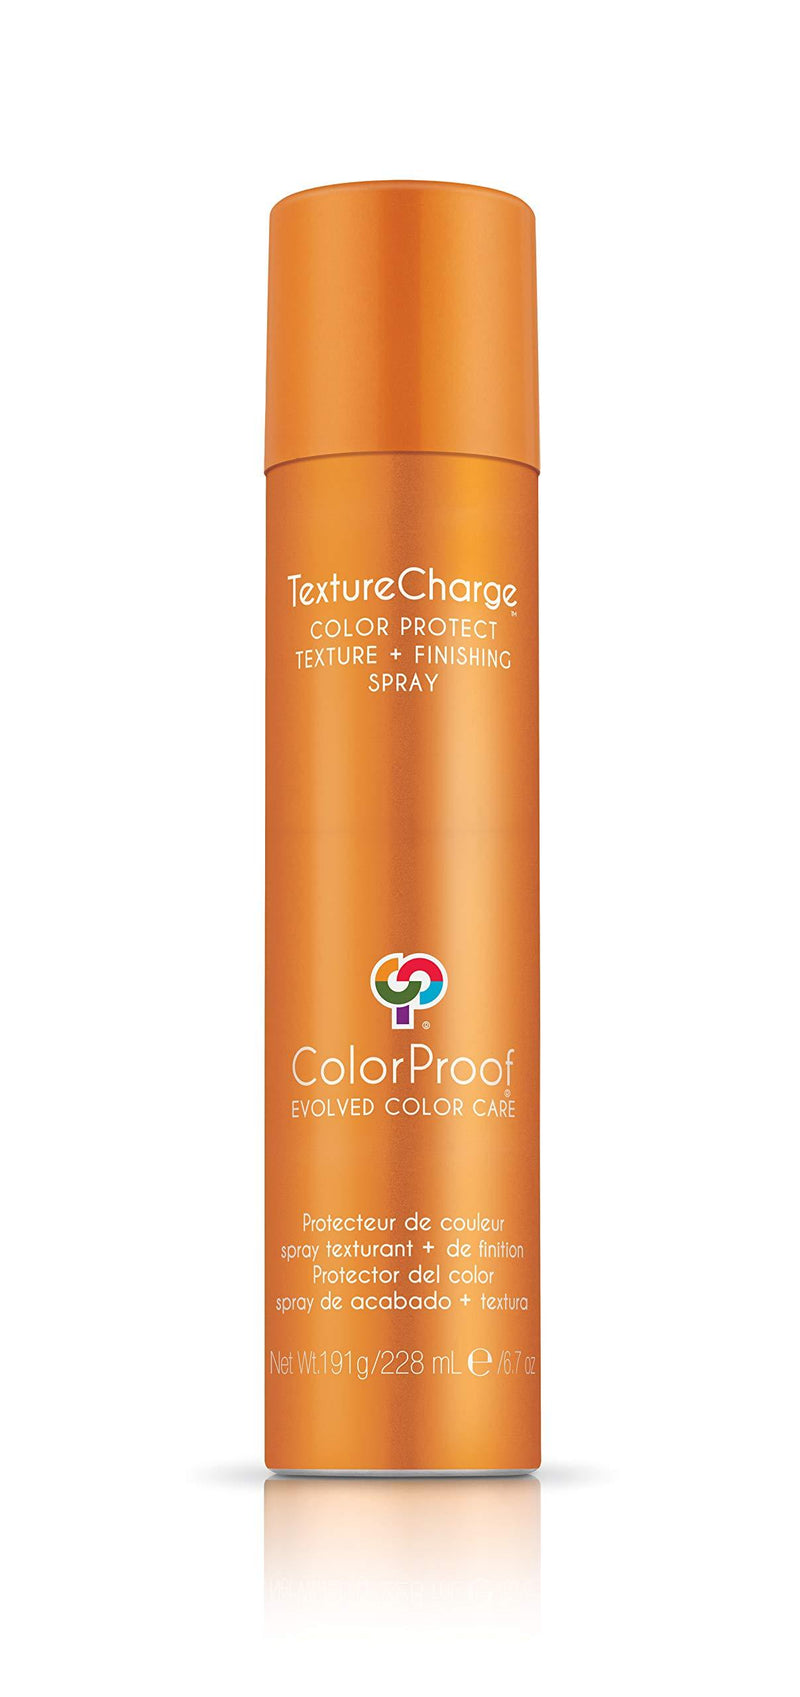 Texture Charge - ColorProof - 6.70oz